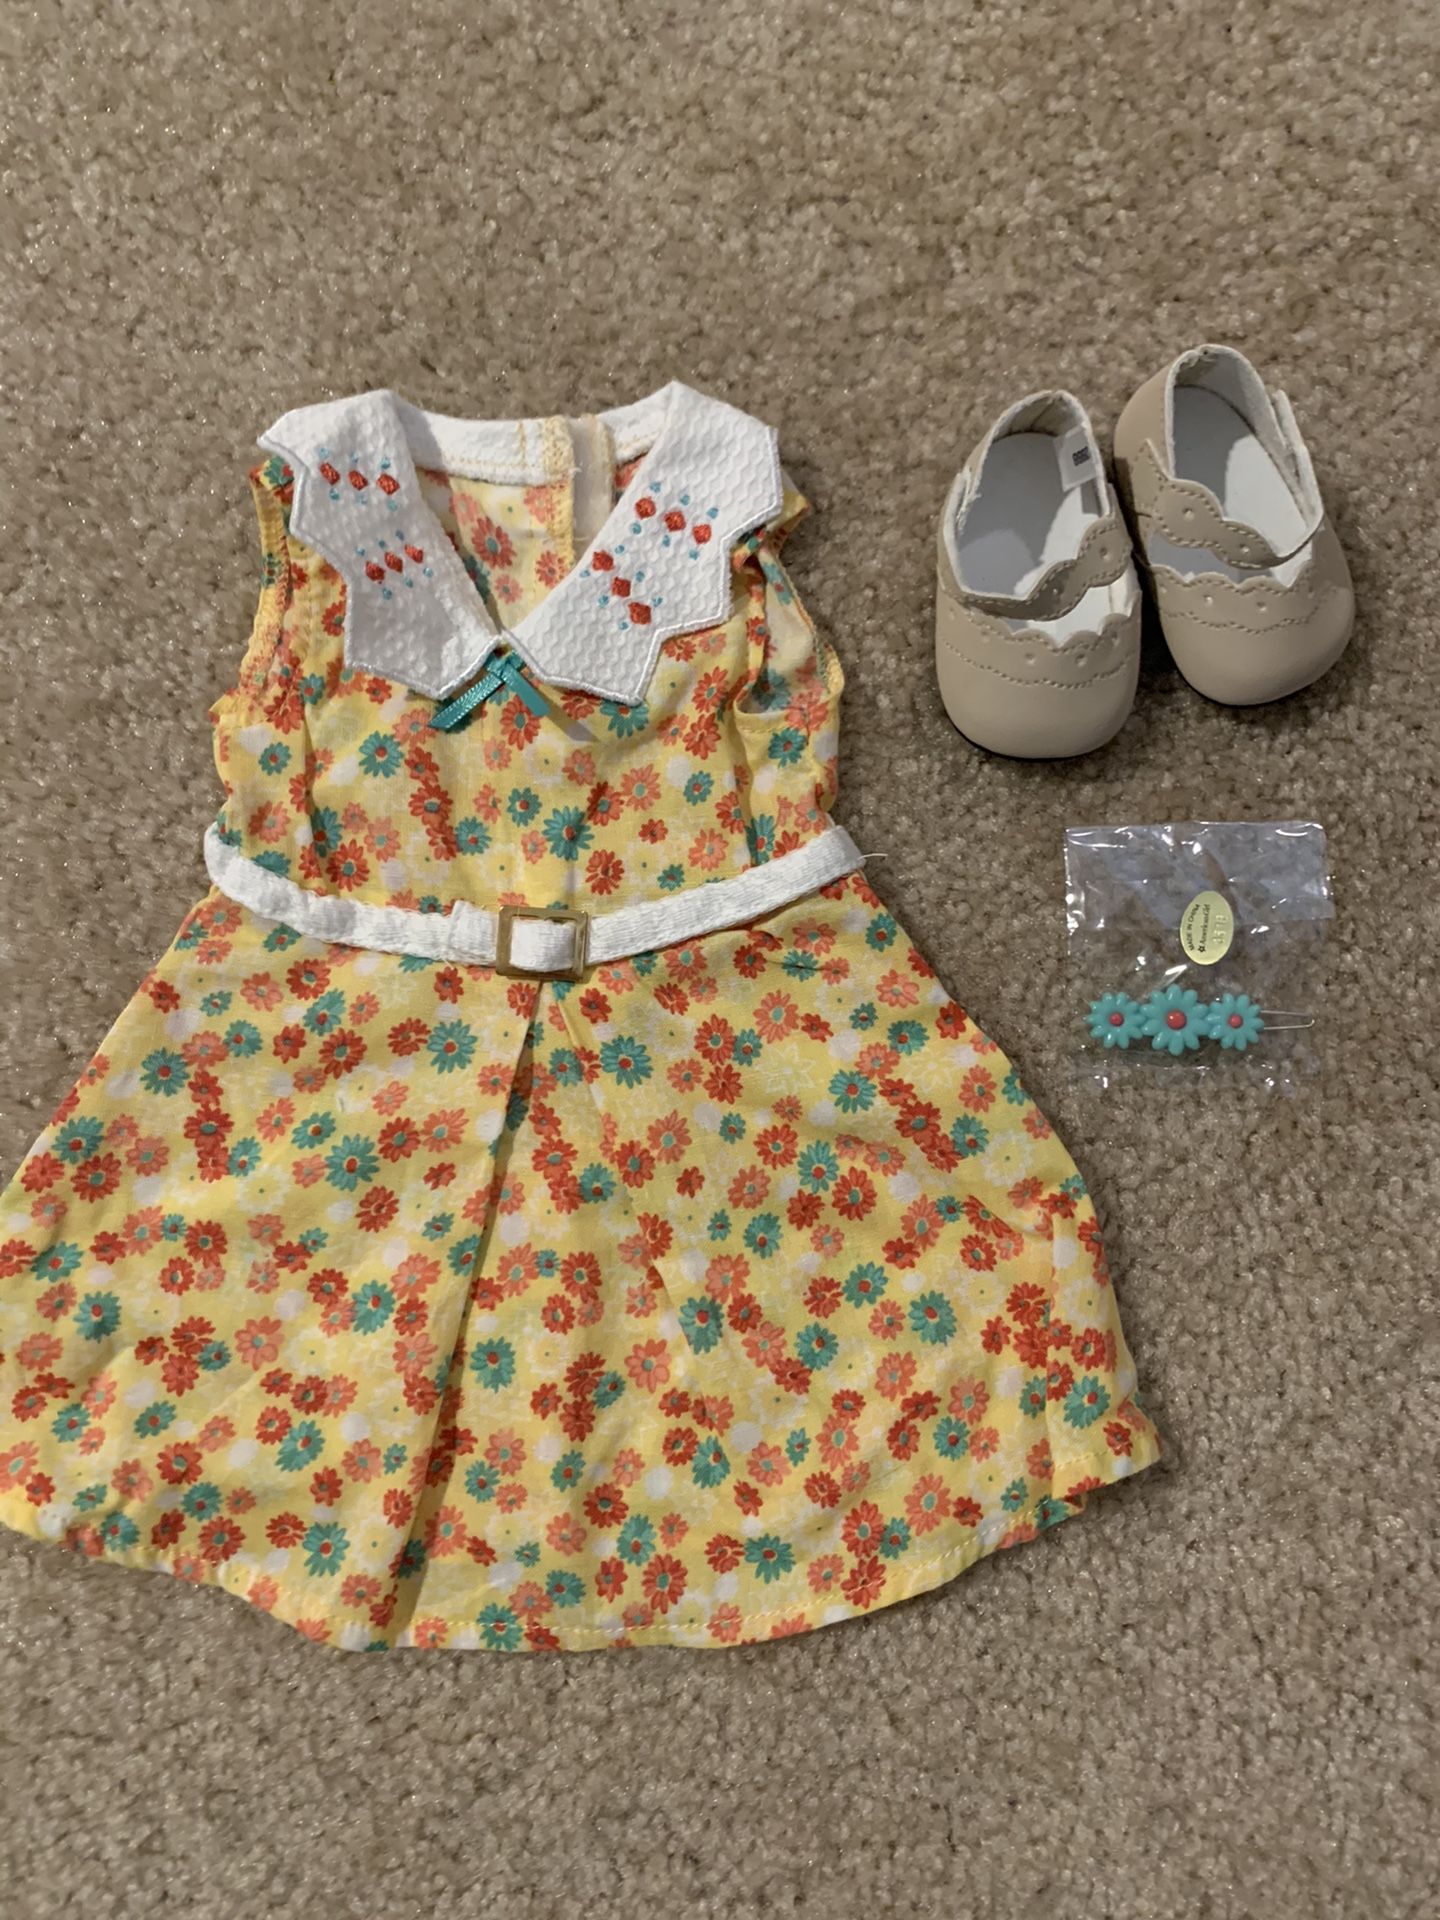 American Girl Kit Dress Barrette and Shoes